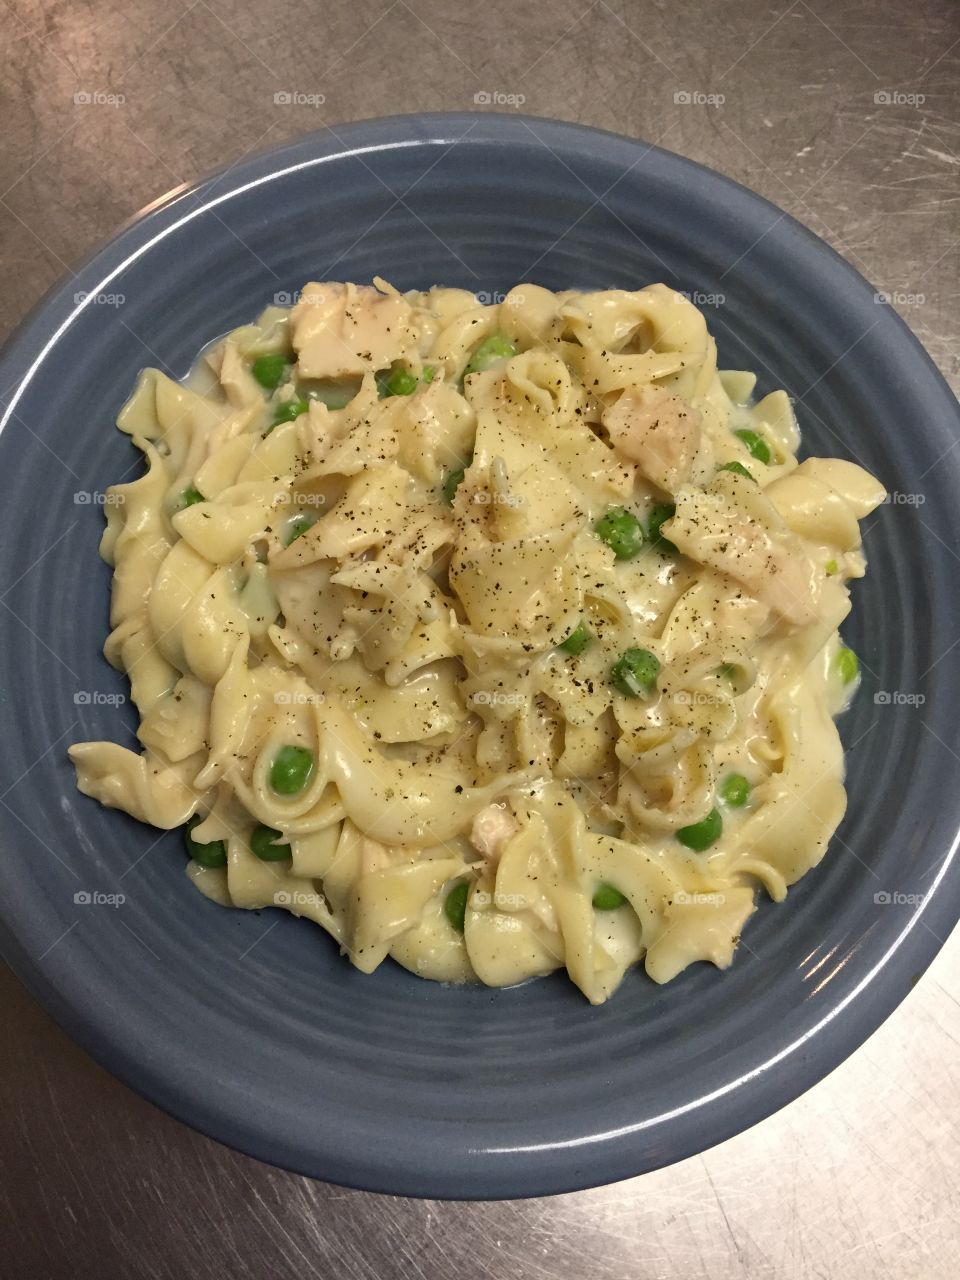 Chicken Noodles with Peas!